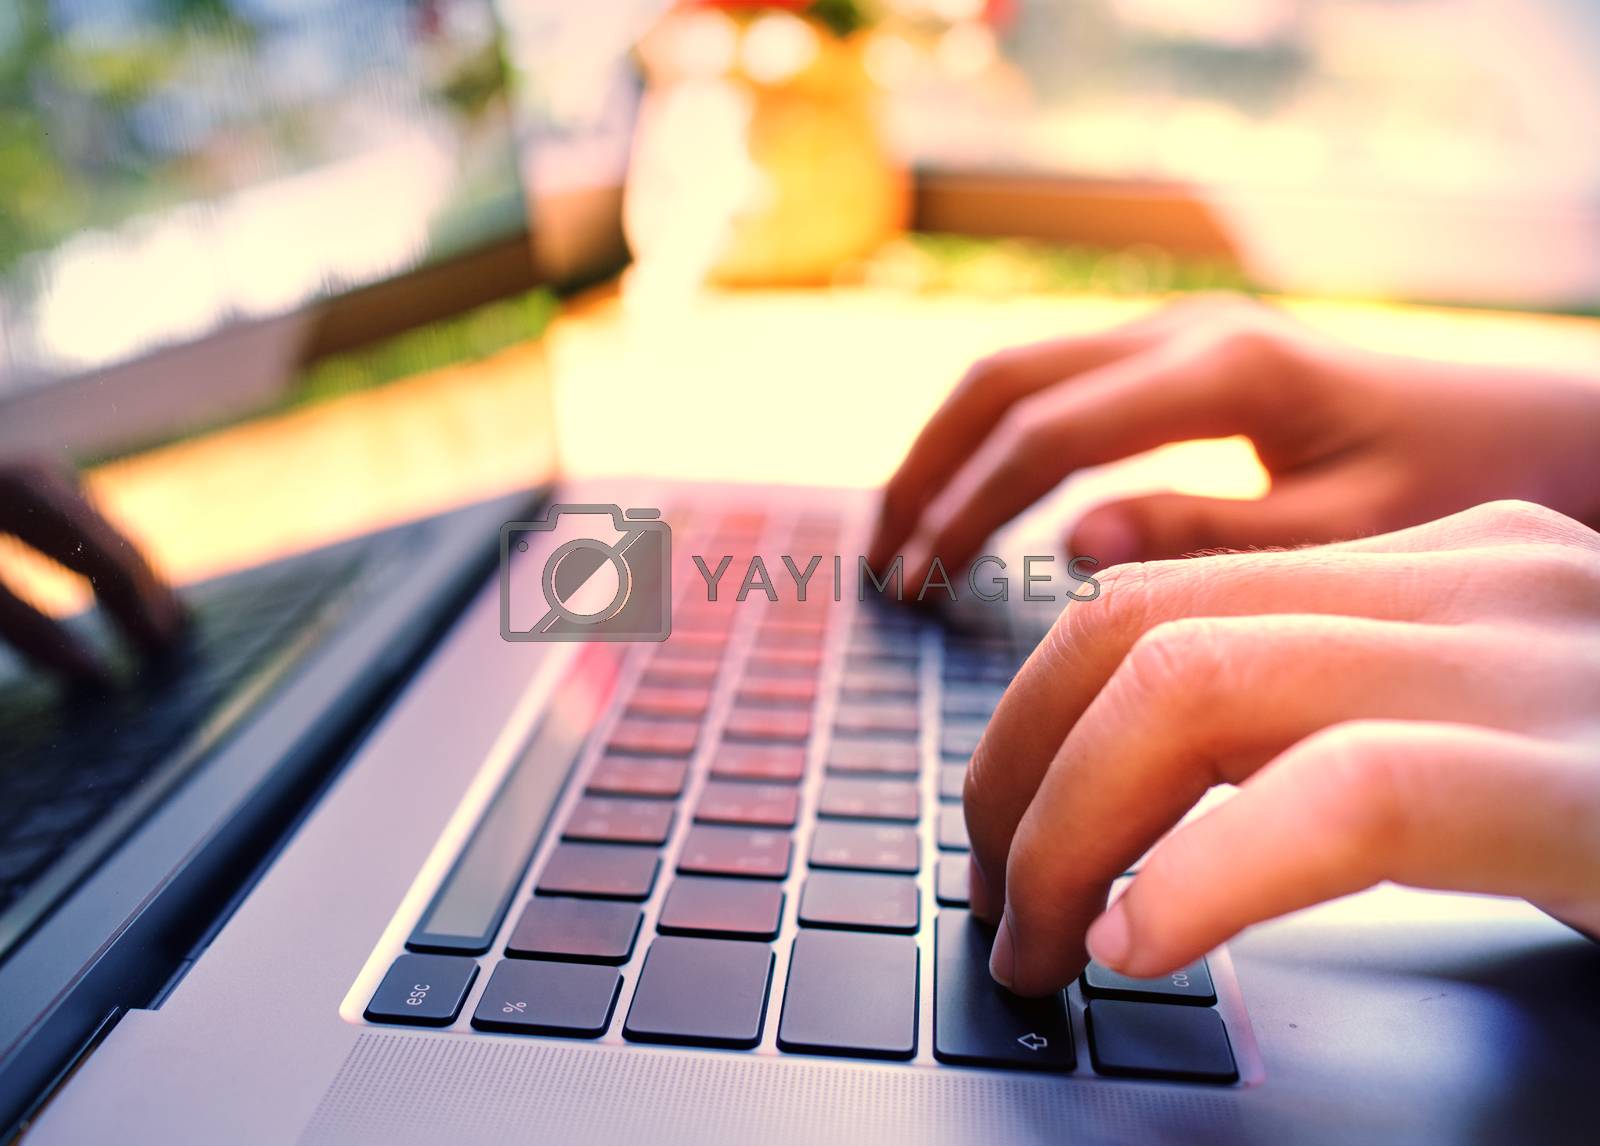 Royalty free image of Girl hand typing laptop keyboard in concept coffee shop Wireless by noppha80